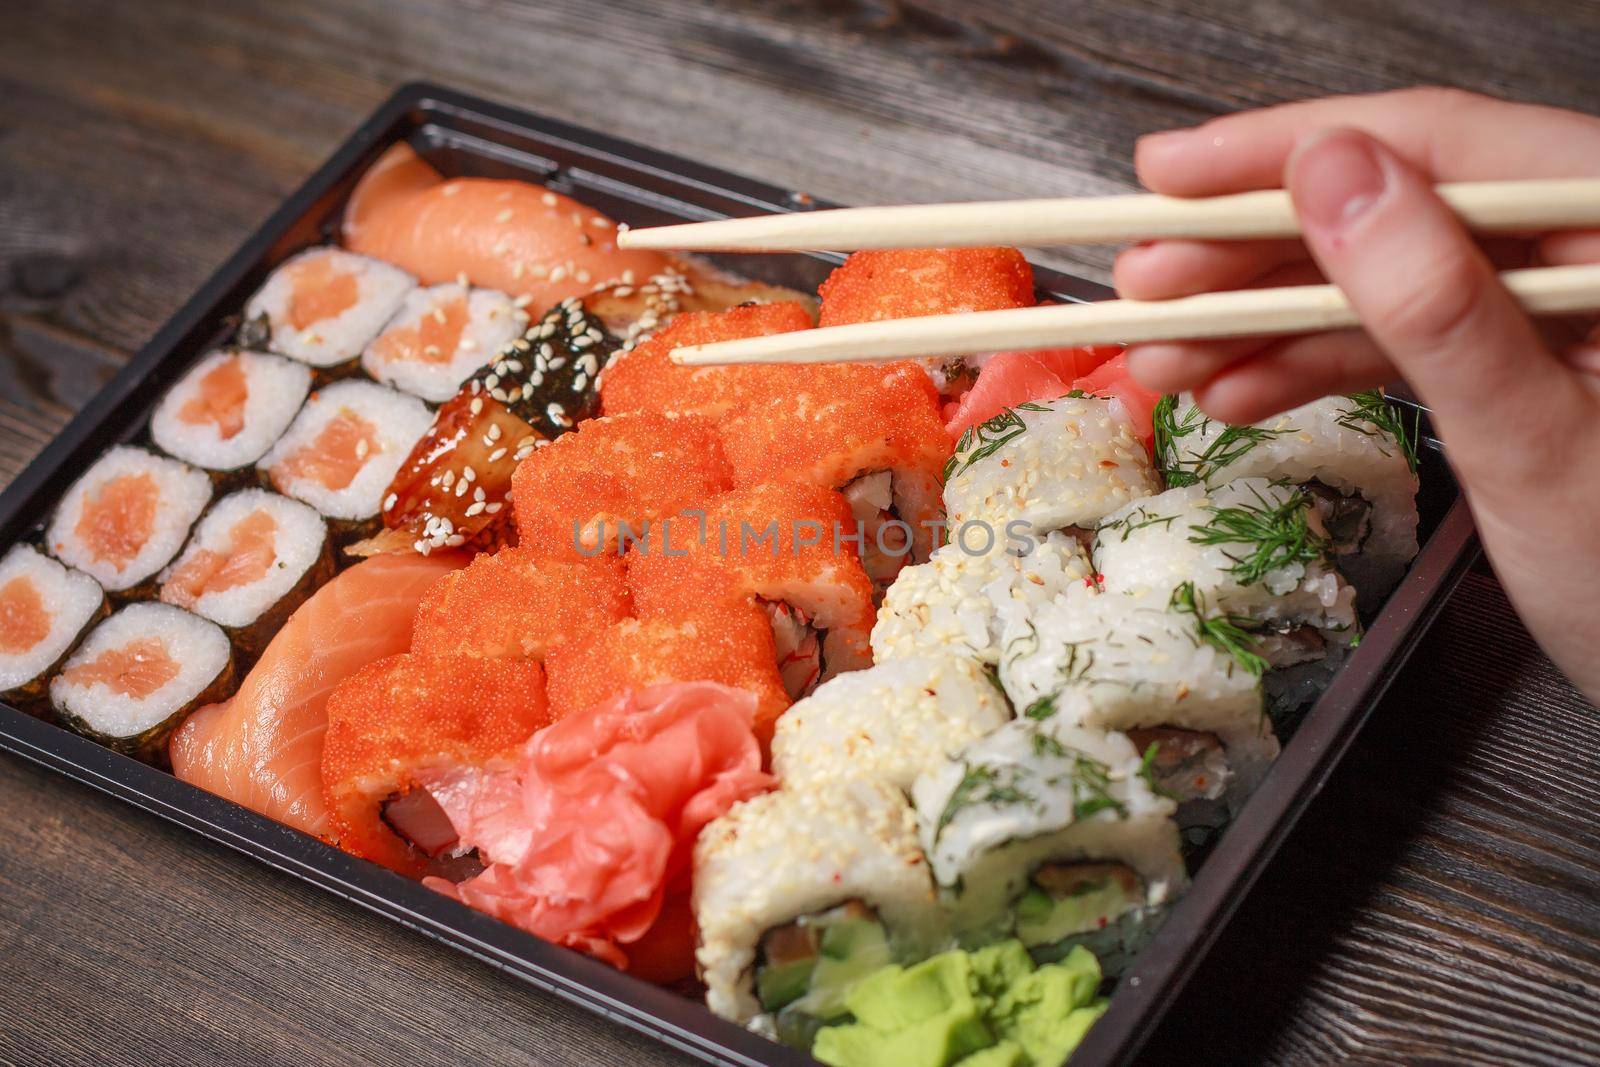 sushi set chopsticks meal japanese food delicacy top view by SHOTPRIME